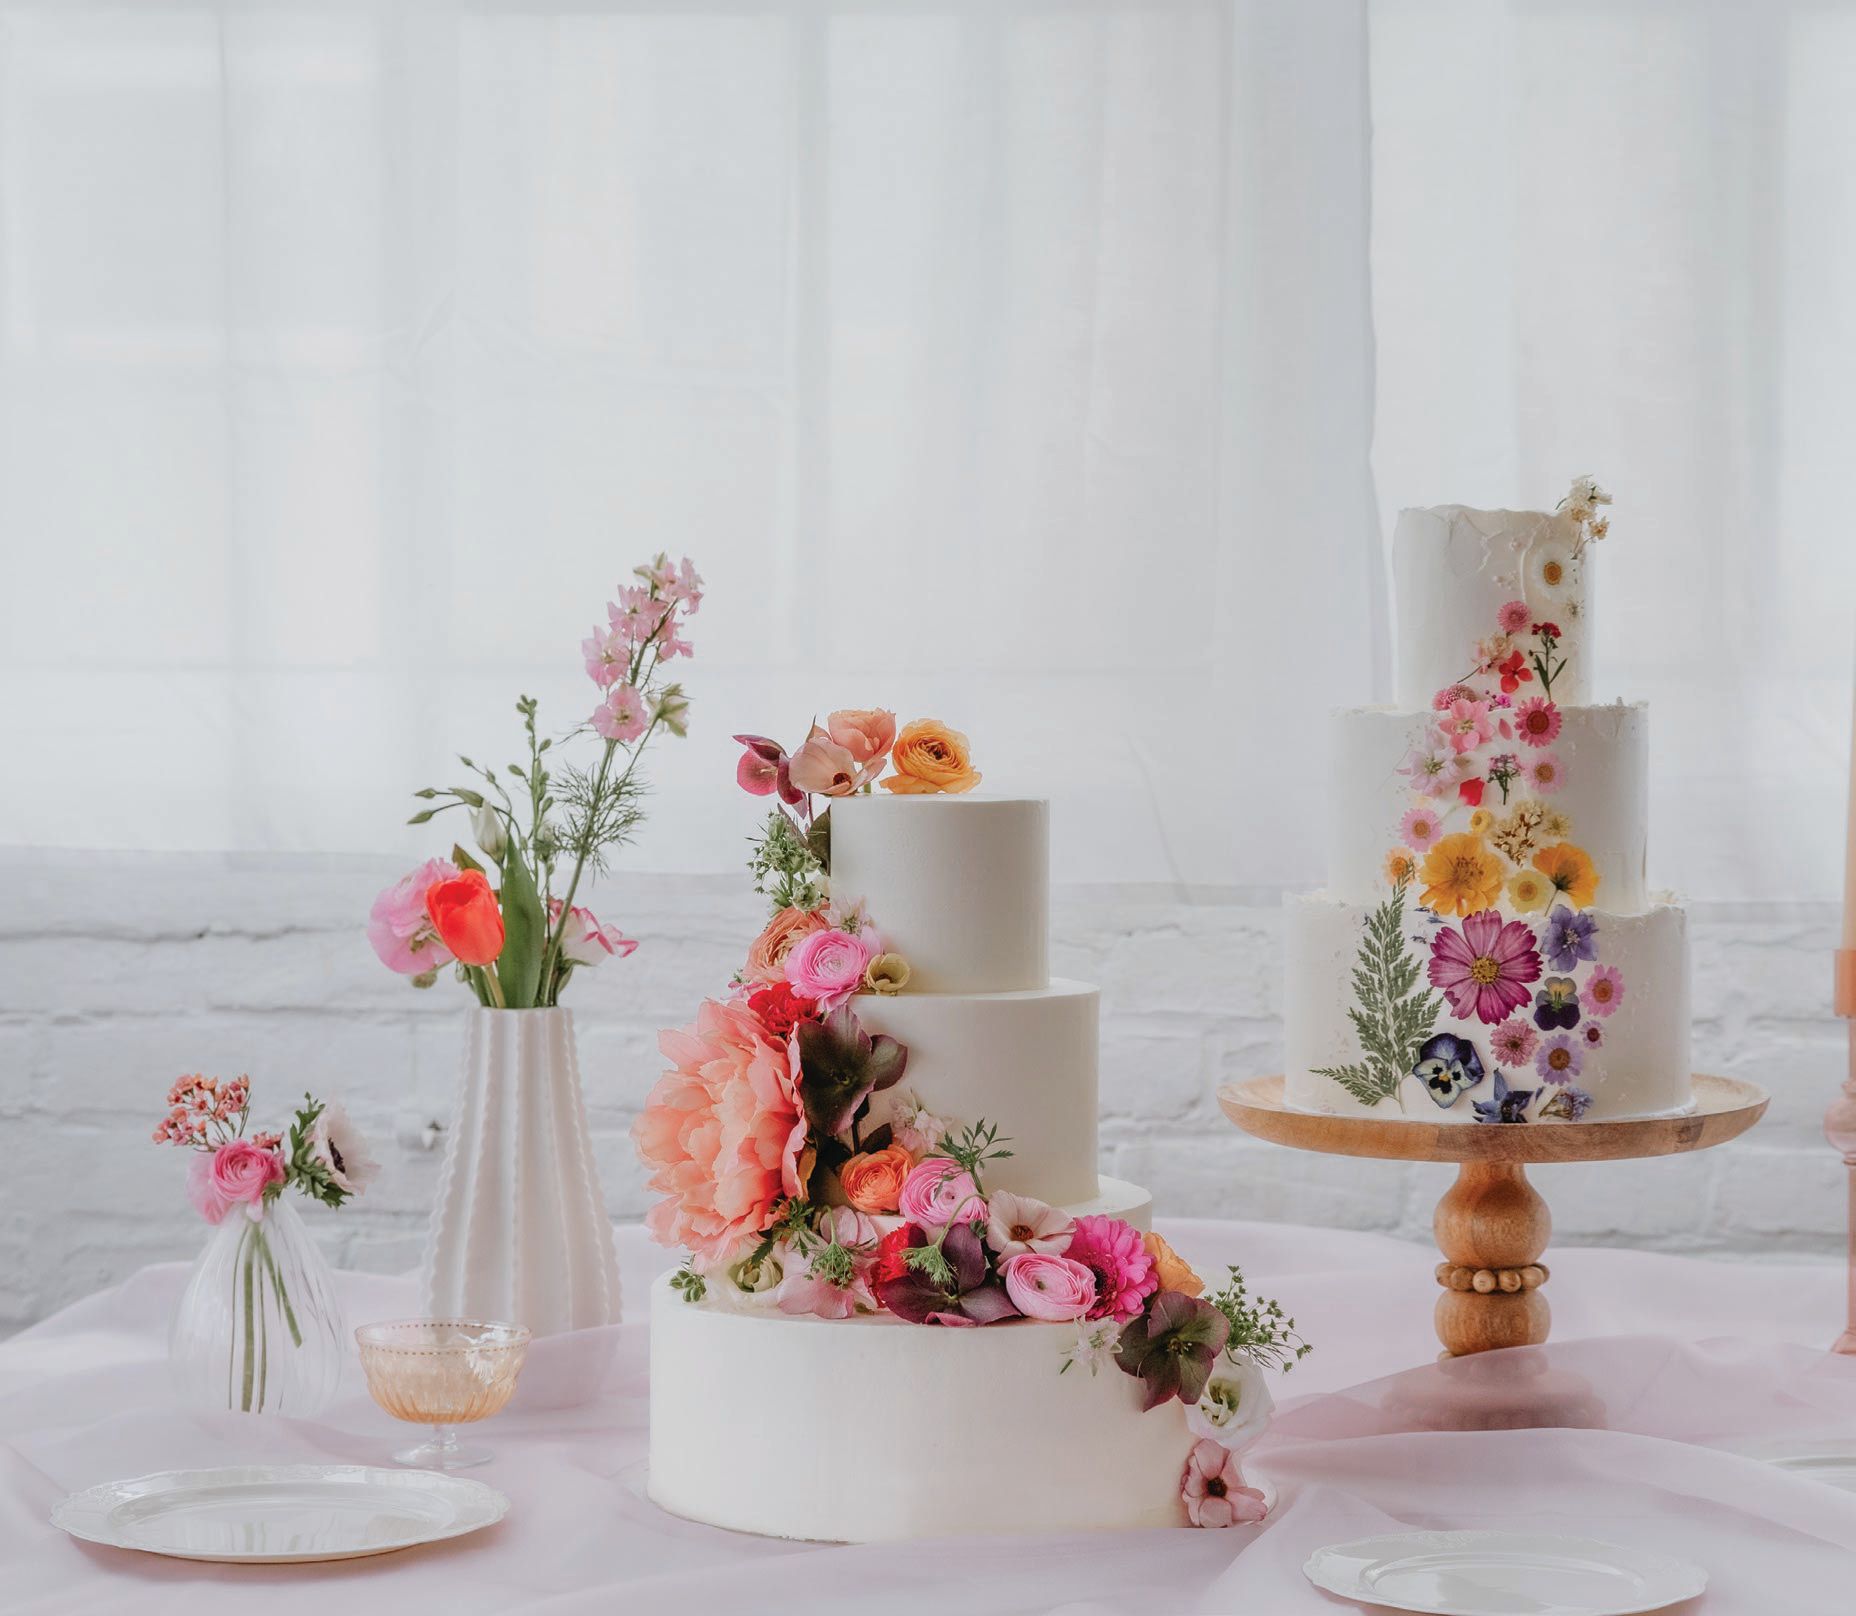 New June is known for its incredible floral designs such as these tiered cakes adorned with sweeping fresh spring peonies, wild flowers, poppies, ranunculus and vibrant pressed florals. PHOTO BY KIERSTEN ALDRIDGE PHOTOGRAPHY